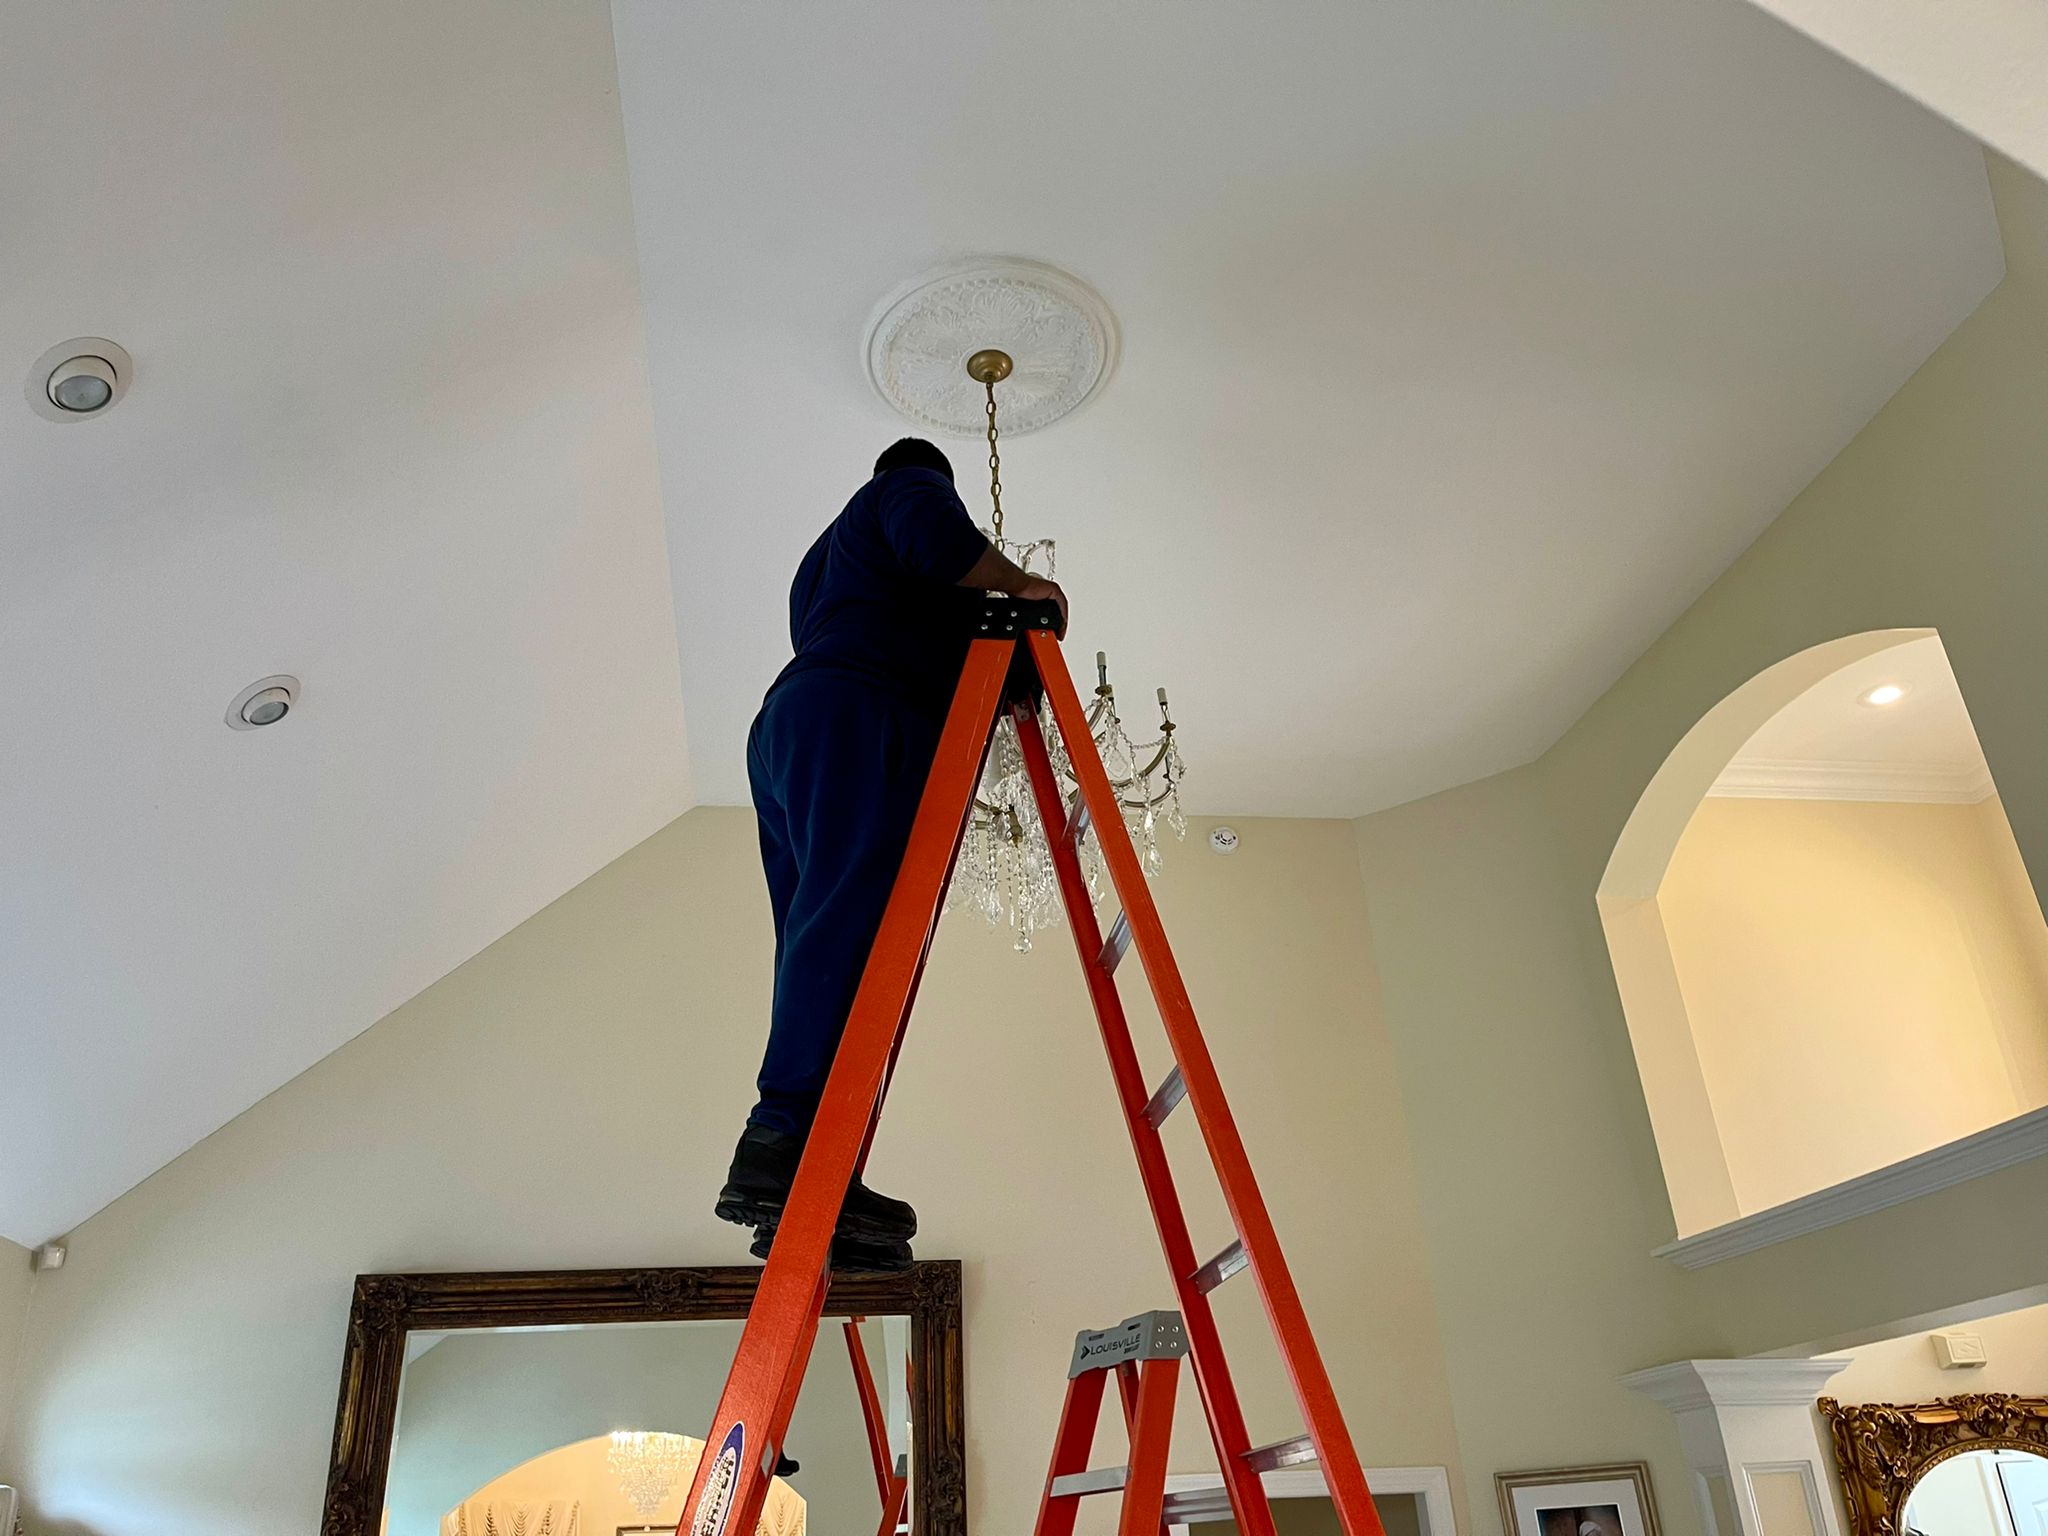 Chandelier cleaning services